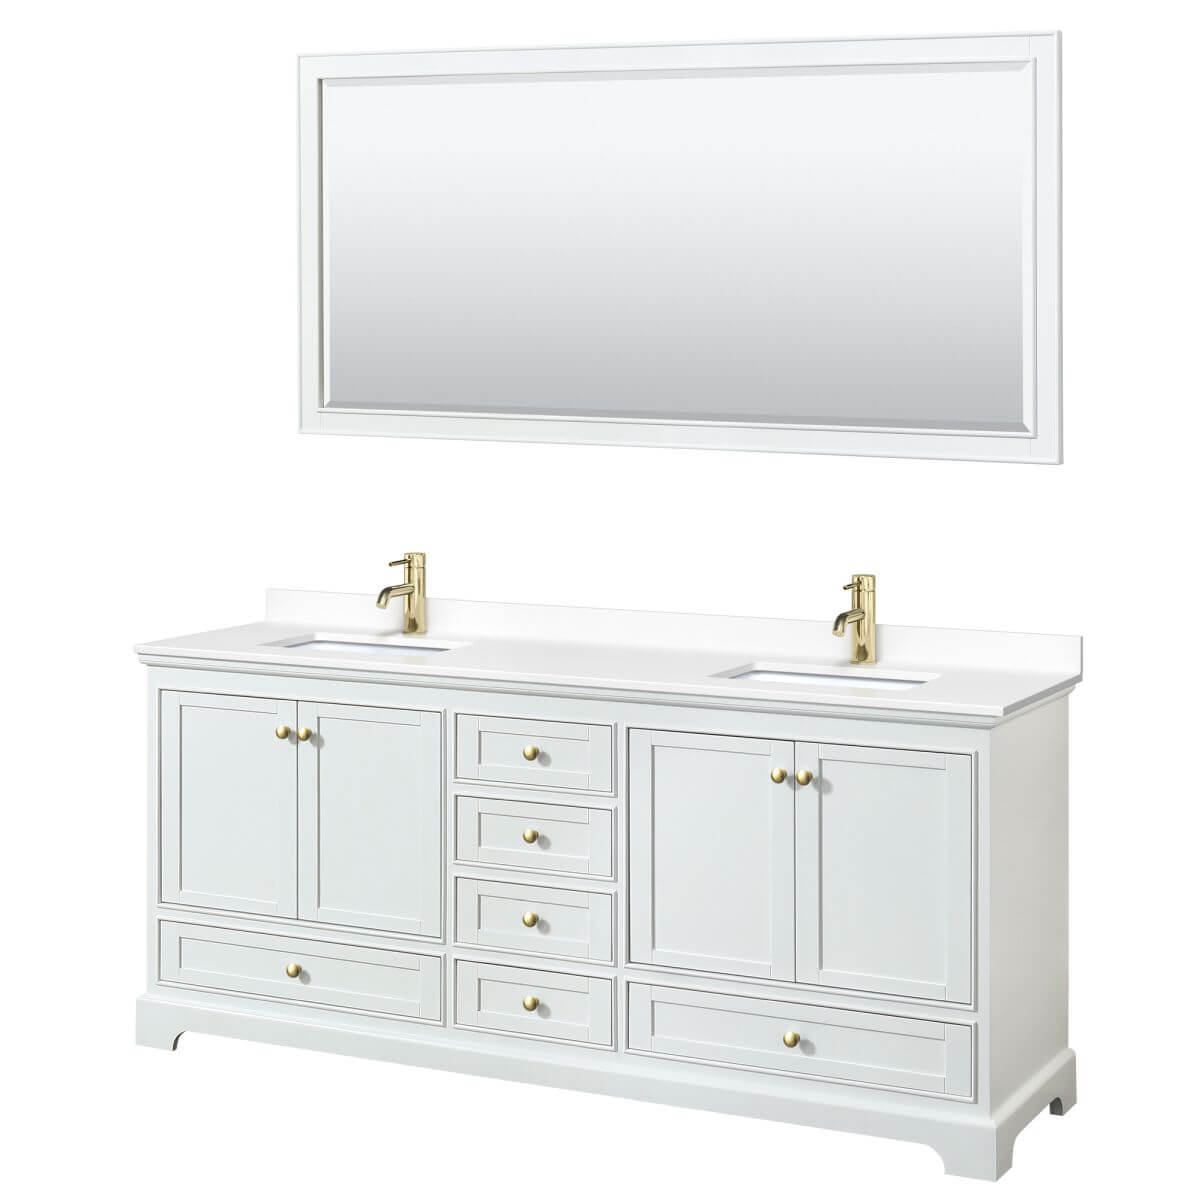 Wyndham Collection Deborah 80 inch Double Bathroom Vanity in White with White Cultured Marble Countertop, Undermount Square Sinks, Brushed Gold Trim and 70 inch Mirror - WCS202080DWGWCUNSM70